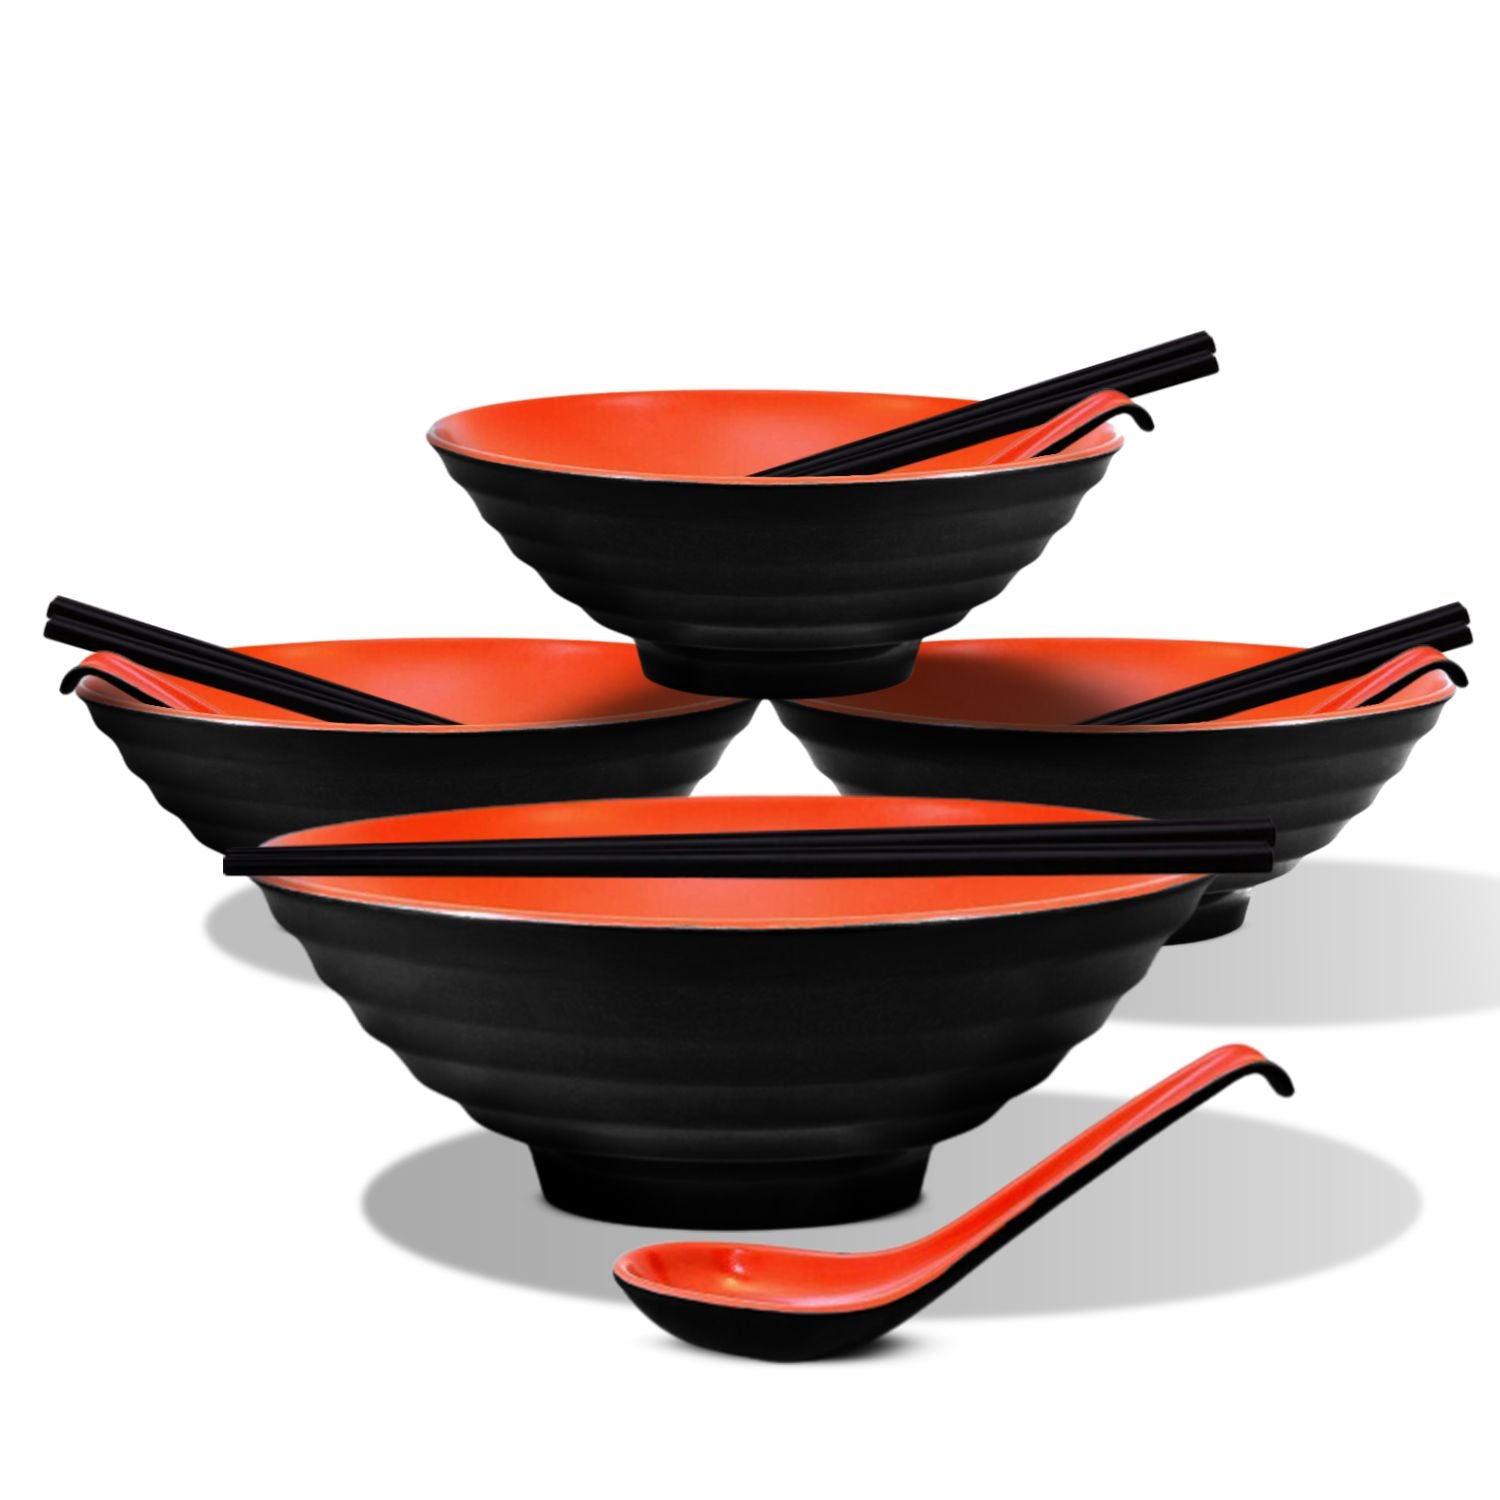 4 Sets (12 Piece) Noodle Soup Bowl Dishware with Matching Spoon and Chopsticks (Red and Black) GO-BWL-100-JH